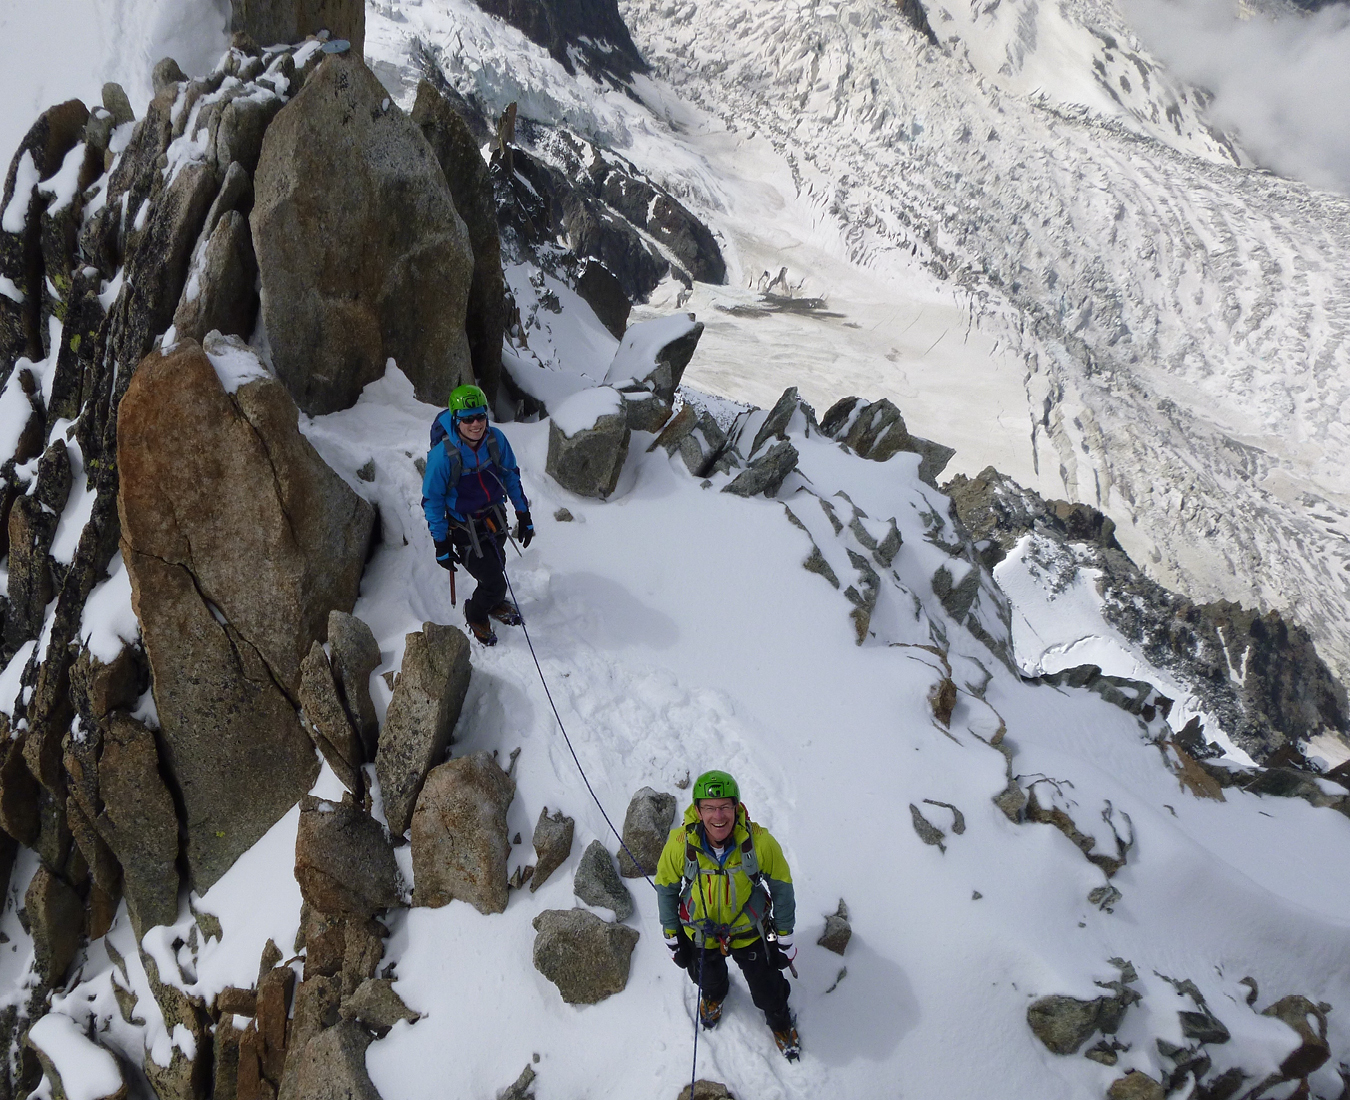 Two climbers roped together high in the alps, steep glaciated terrain surrounds.